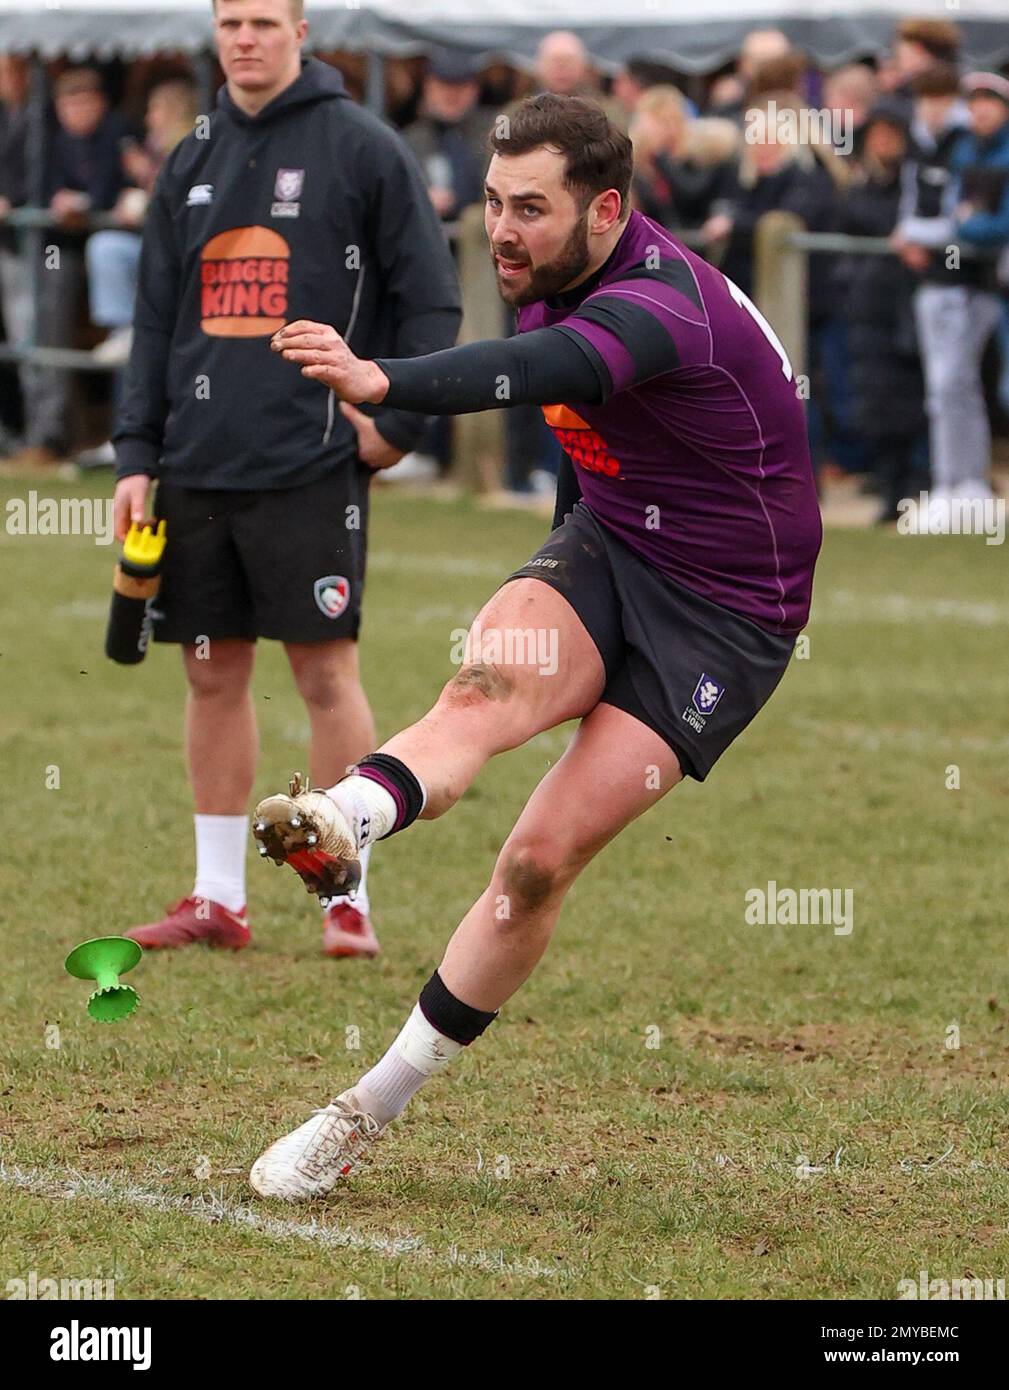 4.02.2022   Leicester, England. Rugby Union.                    Lions Ben Young kicks a conversion in the 37th minute of the National League 2 West match played between Leicester Lions and Hinckley rfc at Westleigh Park, Blaby, Leicester.  © Phil Hutchinson Stock Photo